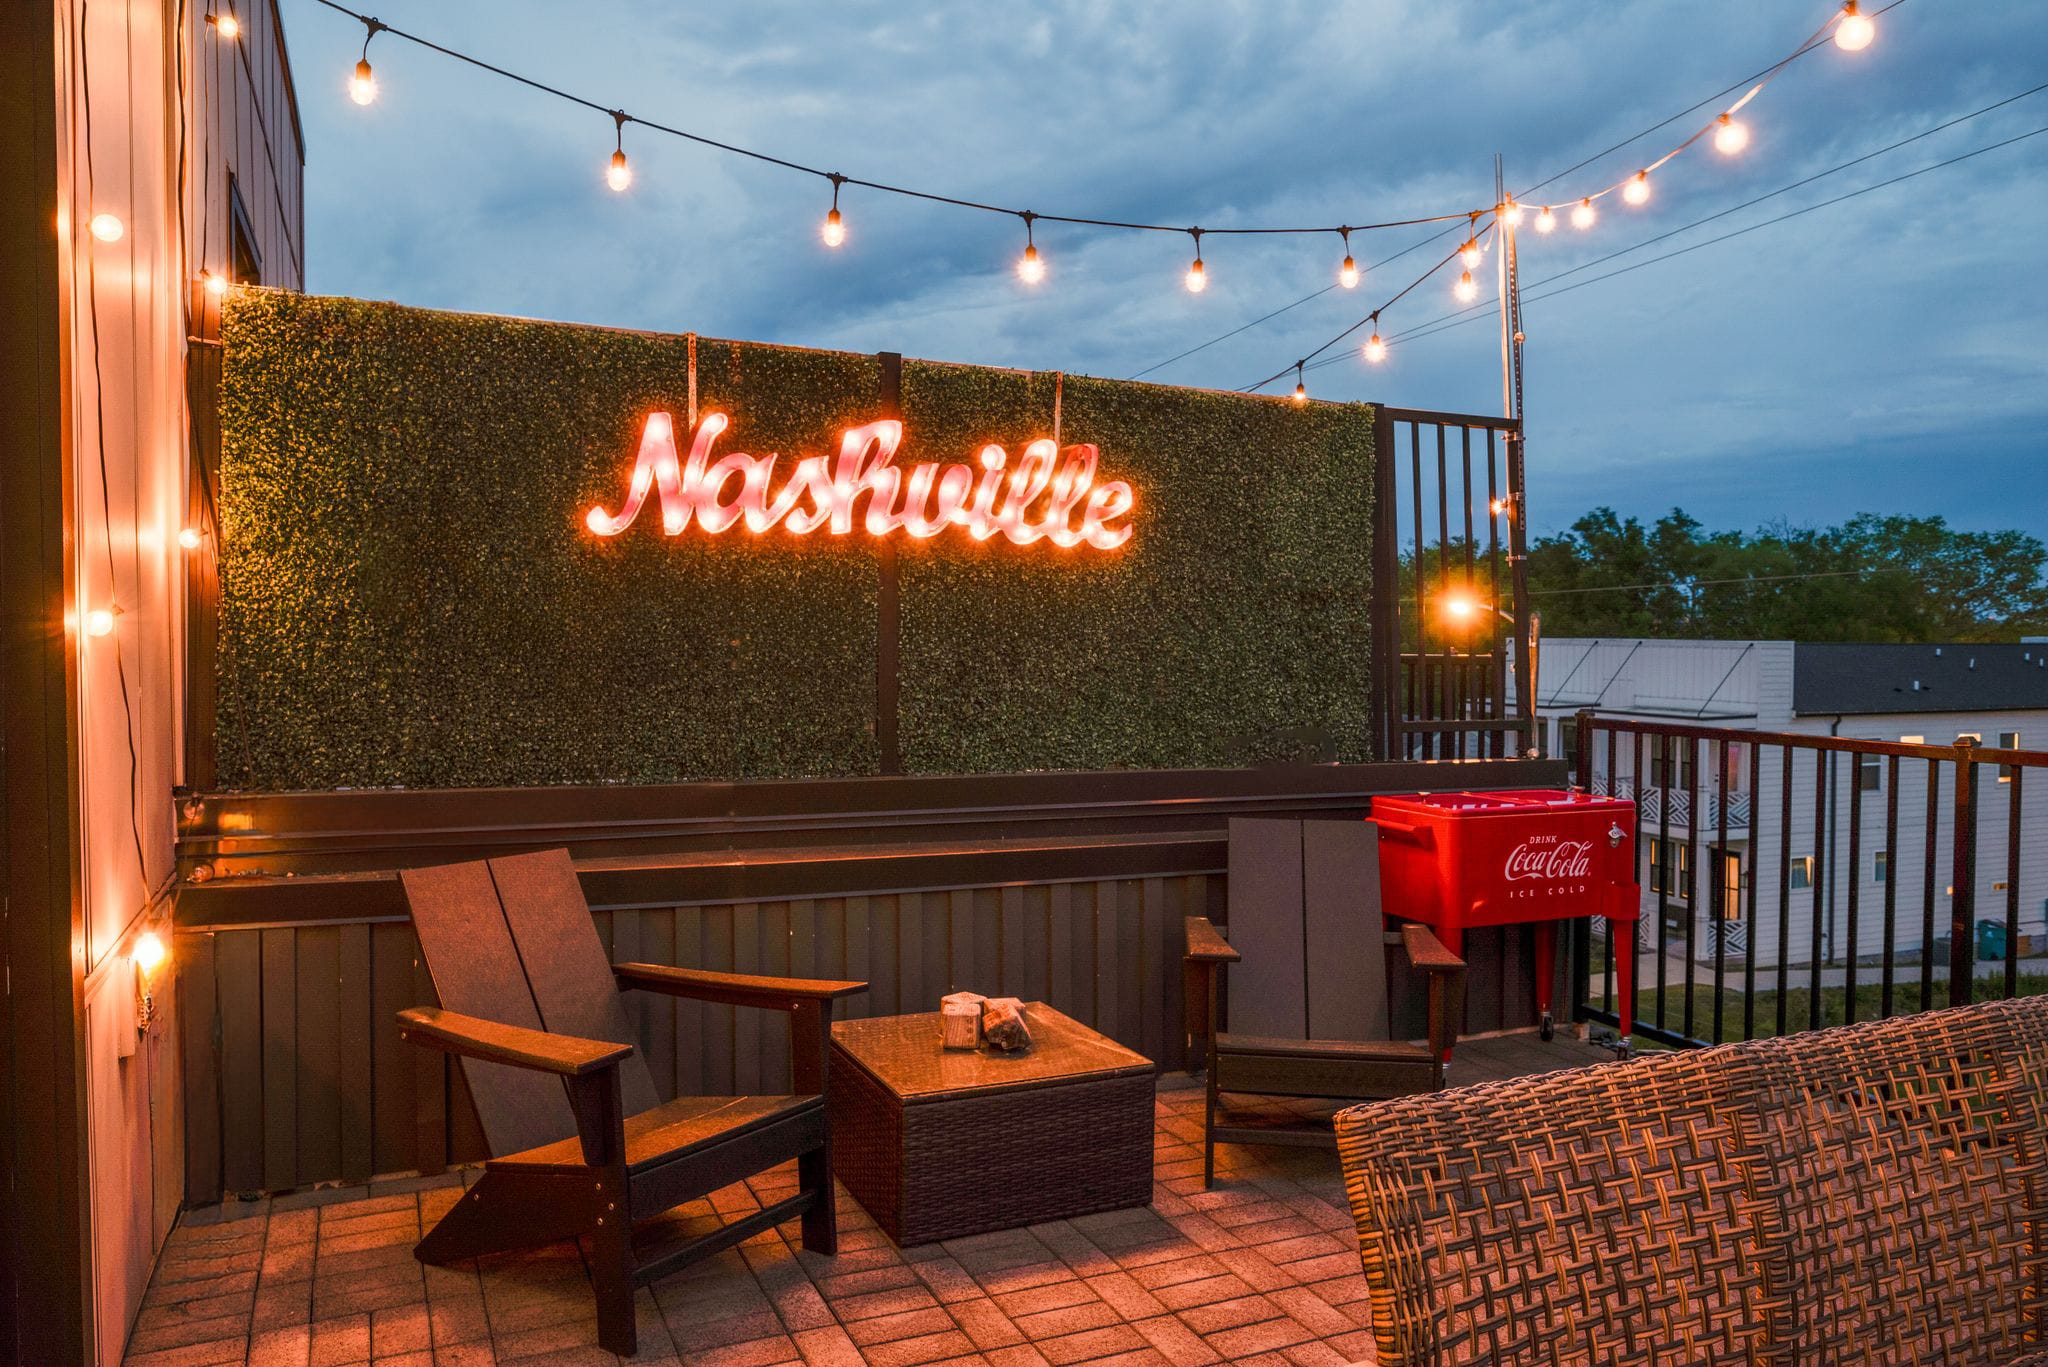 Experience Nashville's charm under ambient string lights on our rooftop lounge, a scene set for luxury and leisure. Featuring hearty Adirondack and wicker seating alongside a vibrant "Nashville" neon sign, this outdoor space embodies the spirit of Music City. Whether it's a bachelorette celebration or a fun vacation with friends, sip a cool beverage from the classic Coca-Cola cooler and let the magic of the environment enhance your stay. Perfect for any group getaway, from family trips to friend reunions. 

Ready to create unforgettable memories? Book with Misfit Homes.